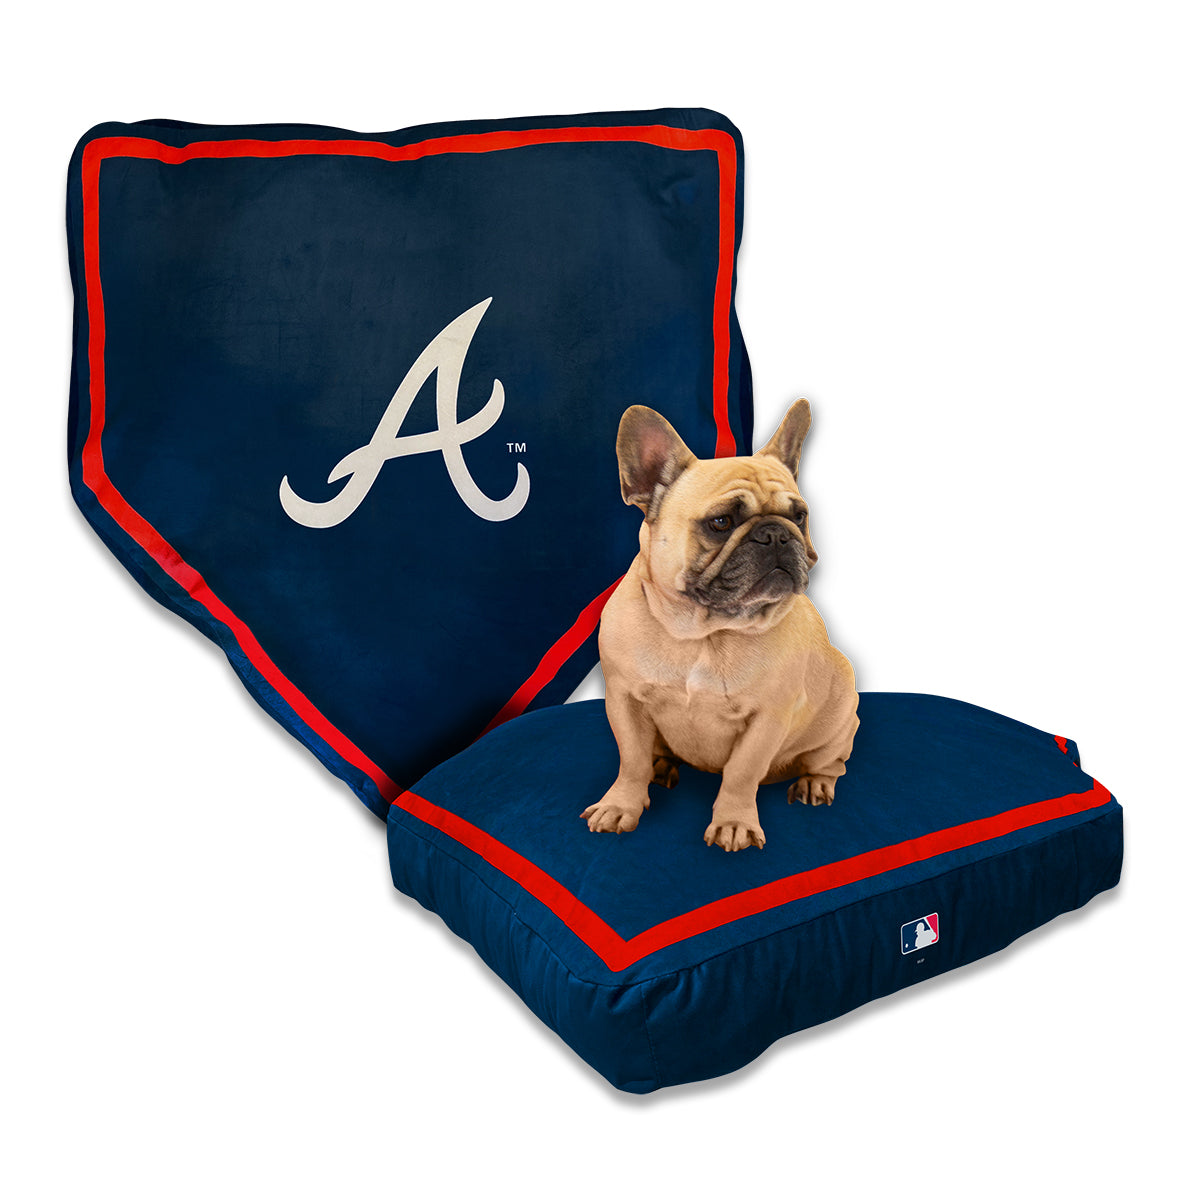 Atlanta Braves Home Plate Bed by Nap Cap